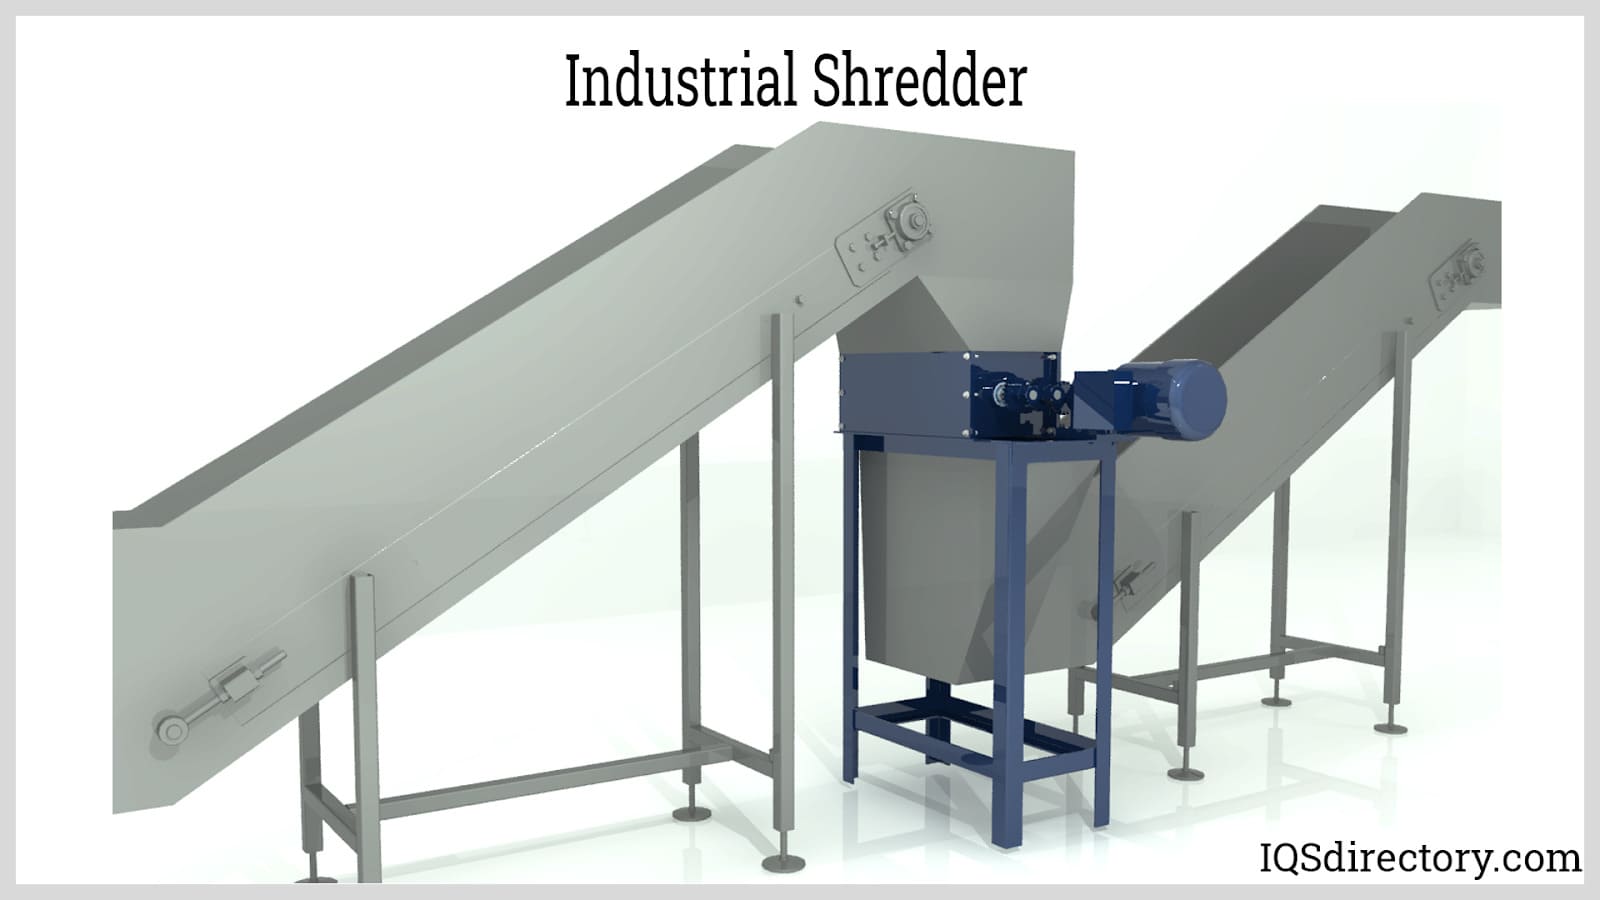 The Ultimate Tool for Plastic Scrap Reduction : Shredder and